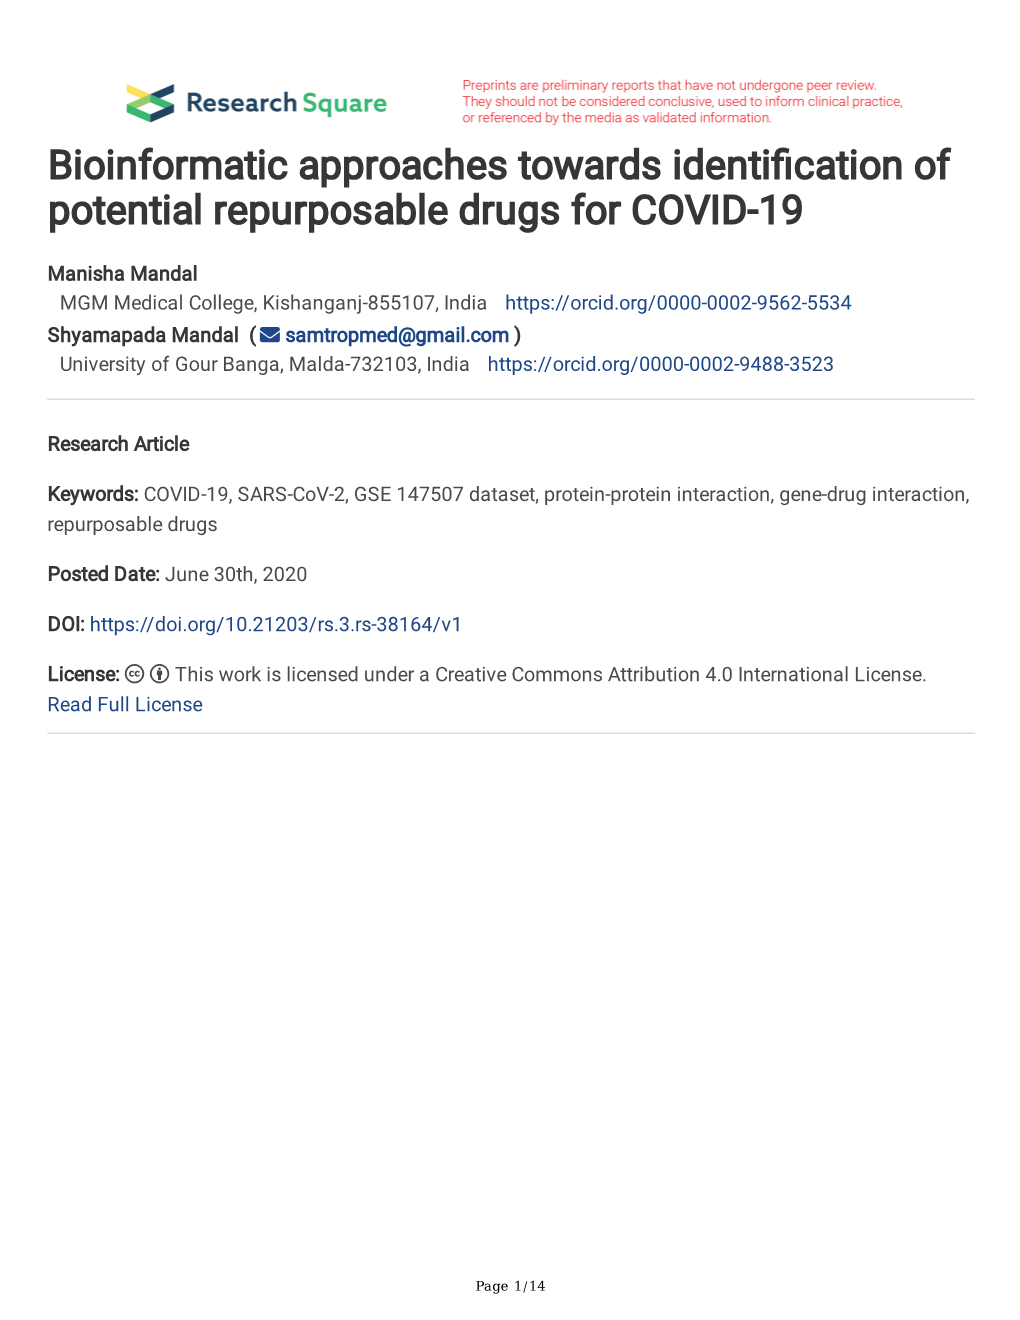 Bioinformatic Approaches Towards Identi Cation of Potential Repurposable Drugs for COVID-19